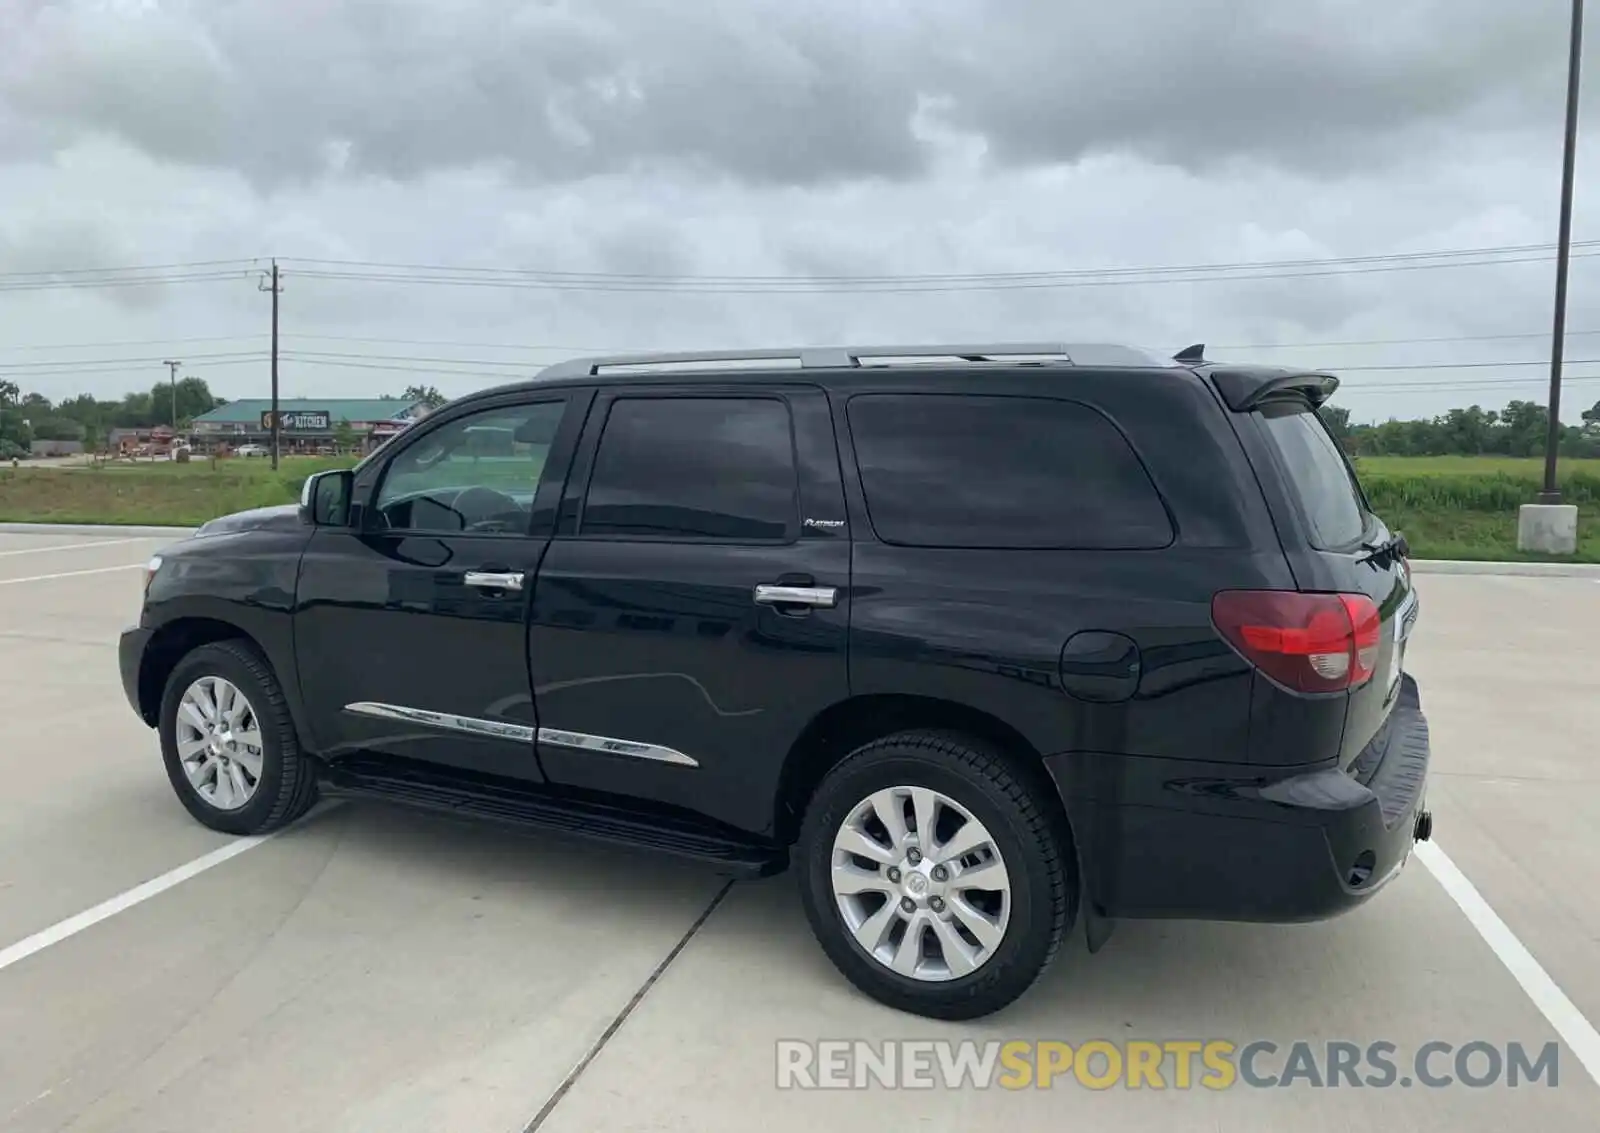 3 Photograph of a damaged car 5TDDY5G13KS170665 TOYOTA SEQUOIA 2019